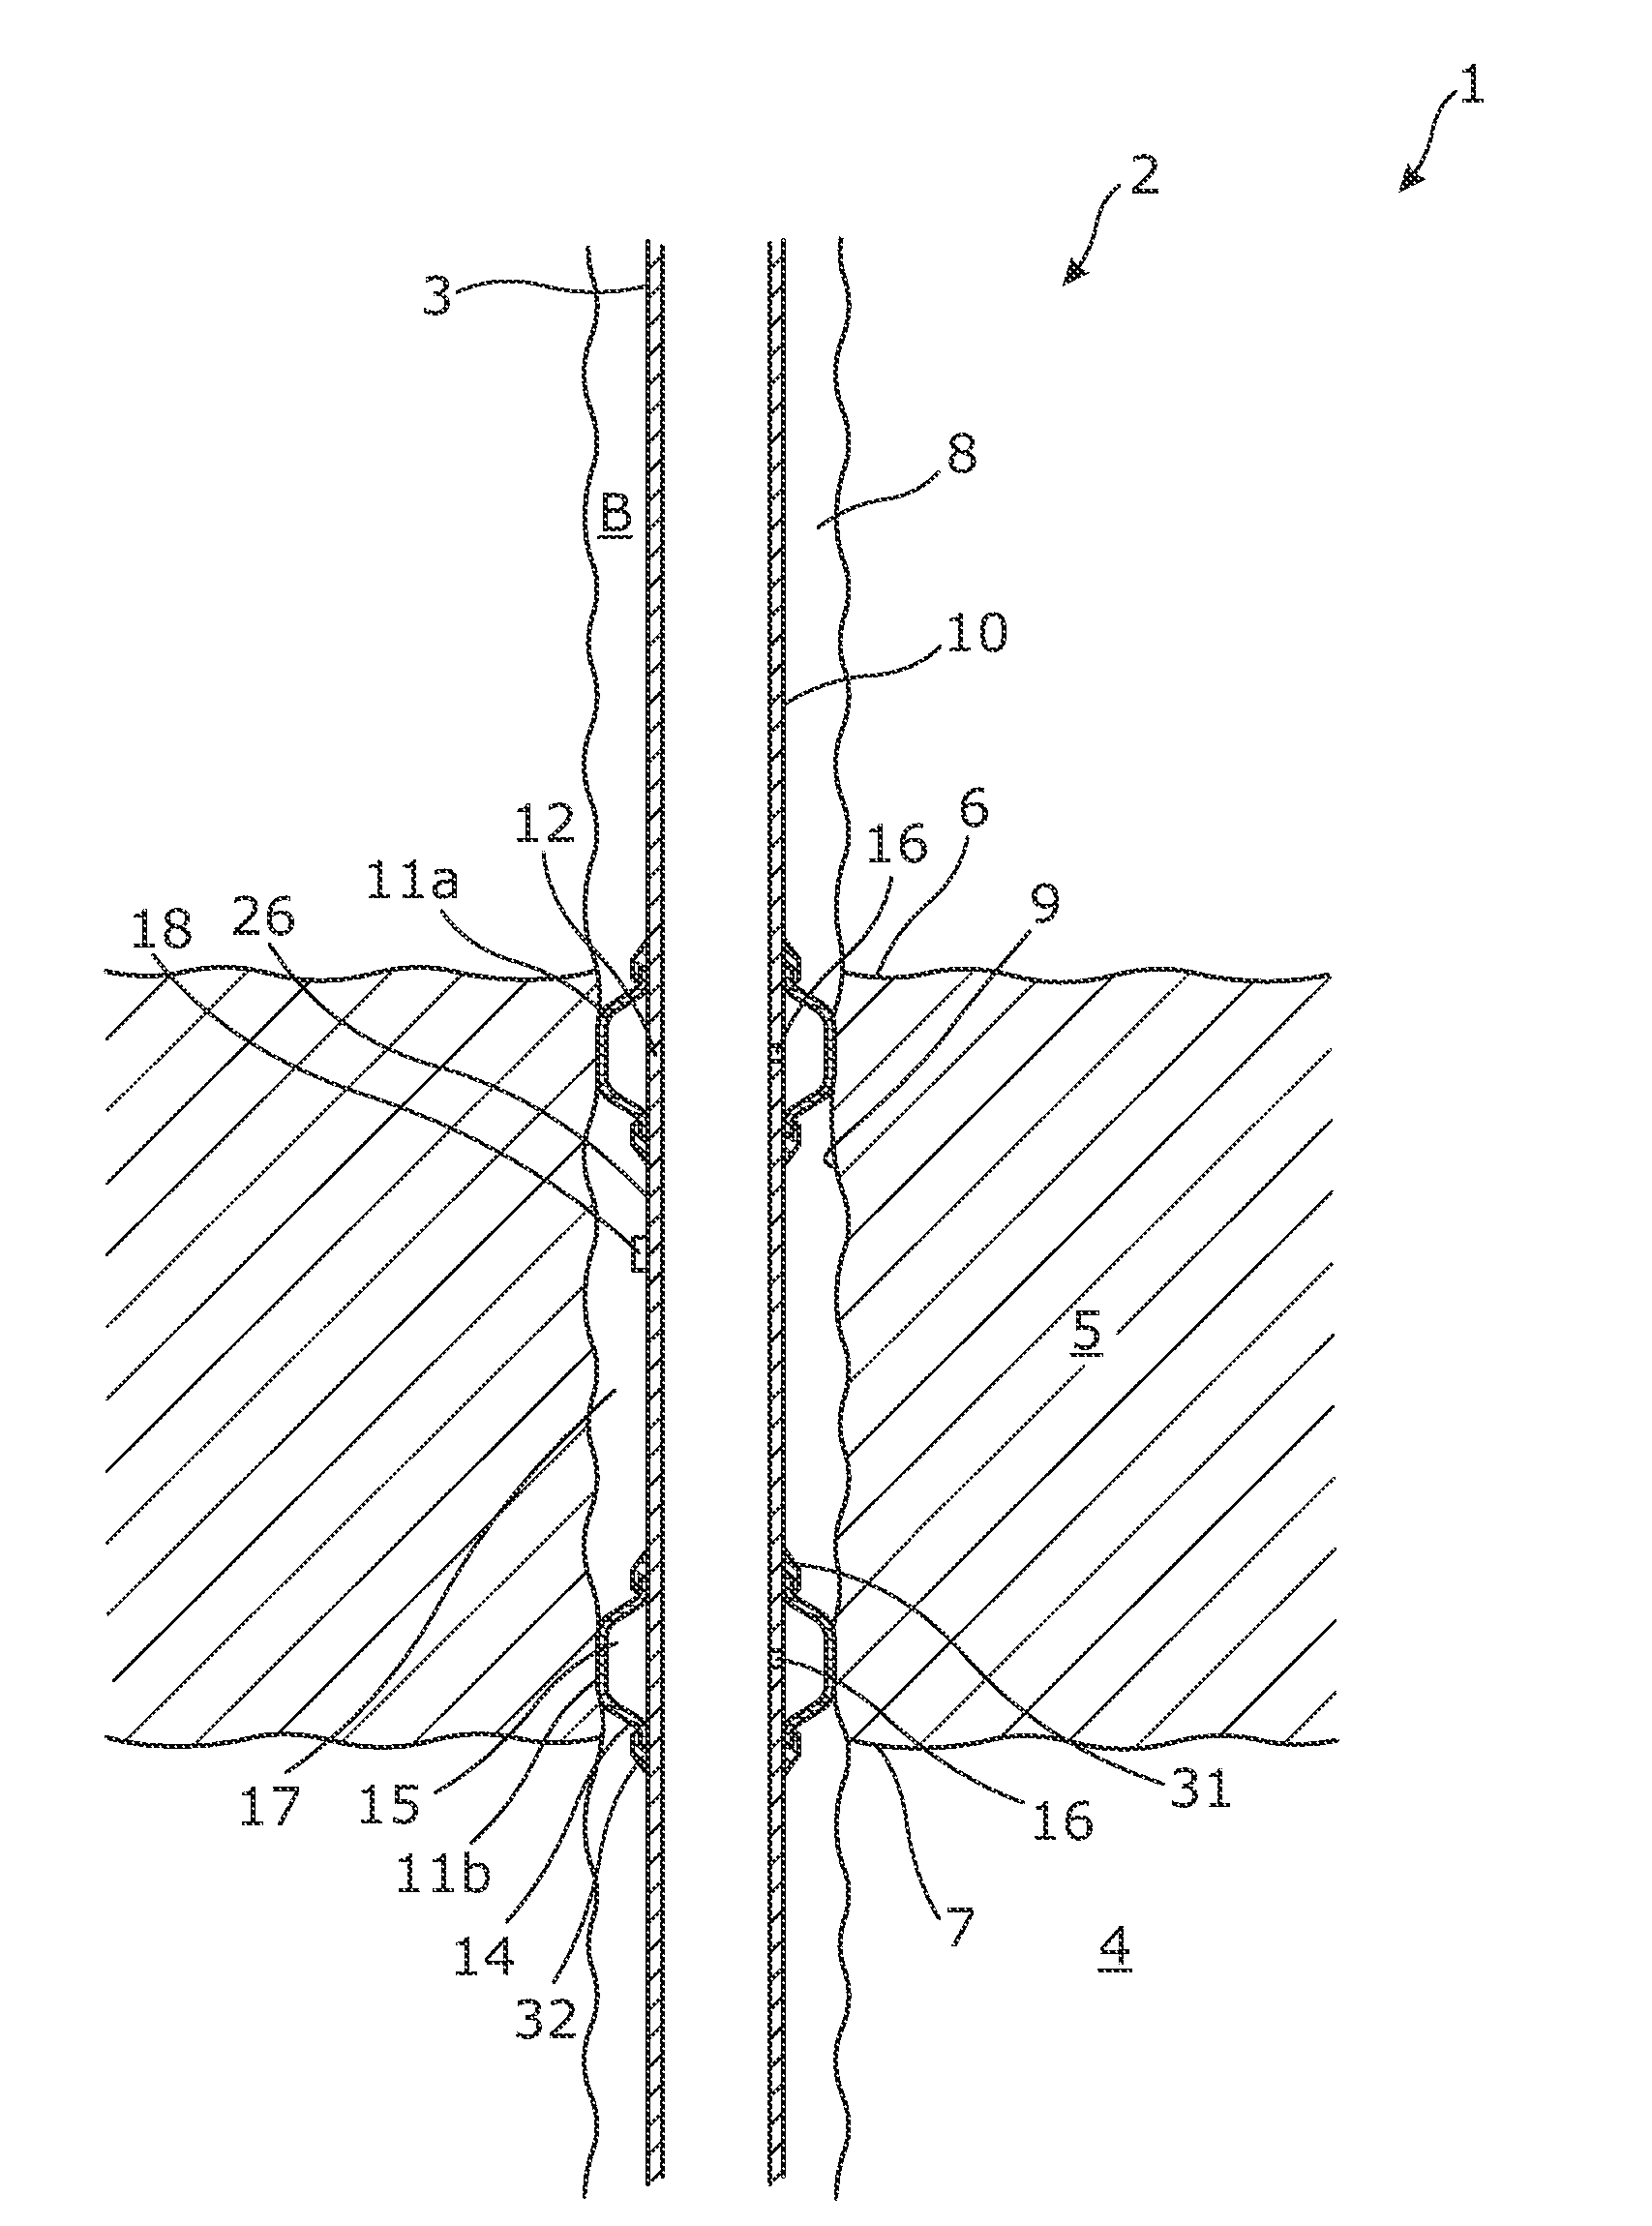 Downhole completion system sealing against the cap layer